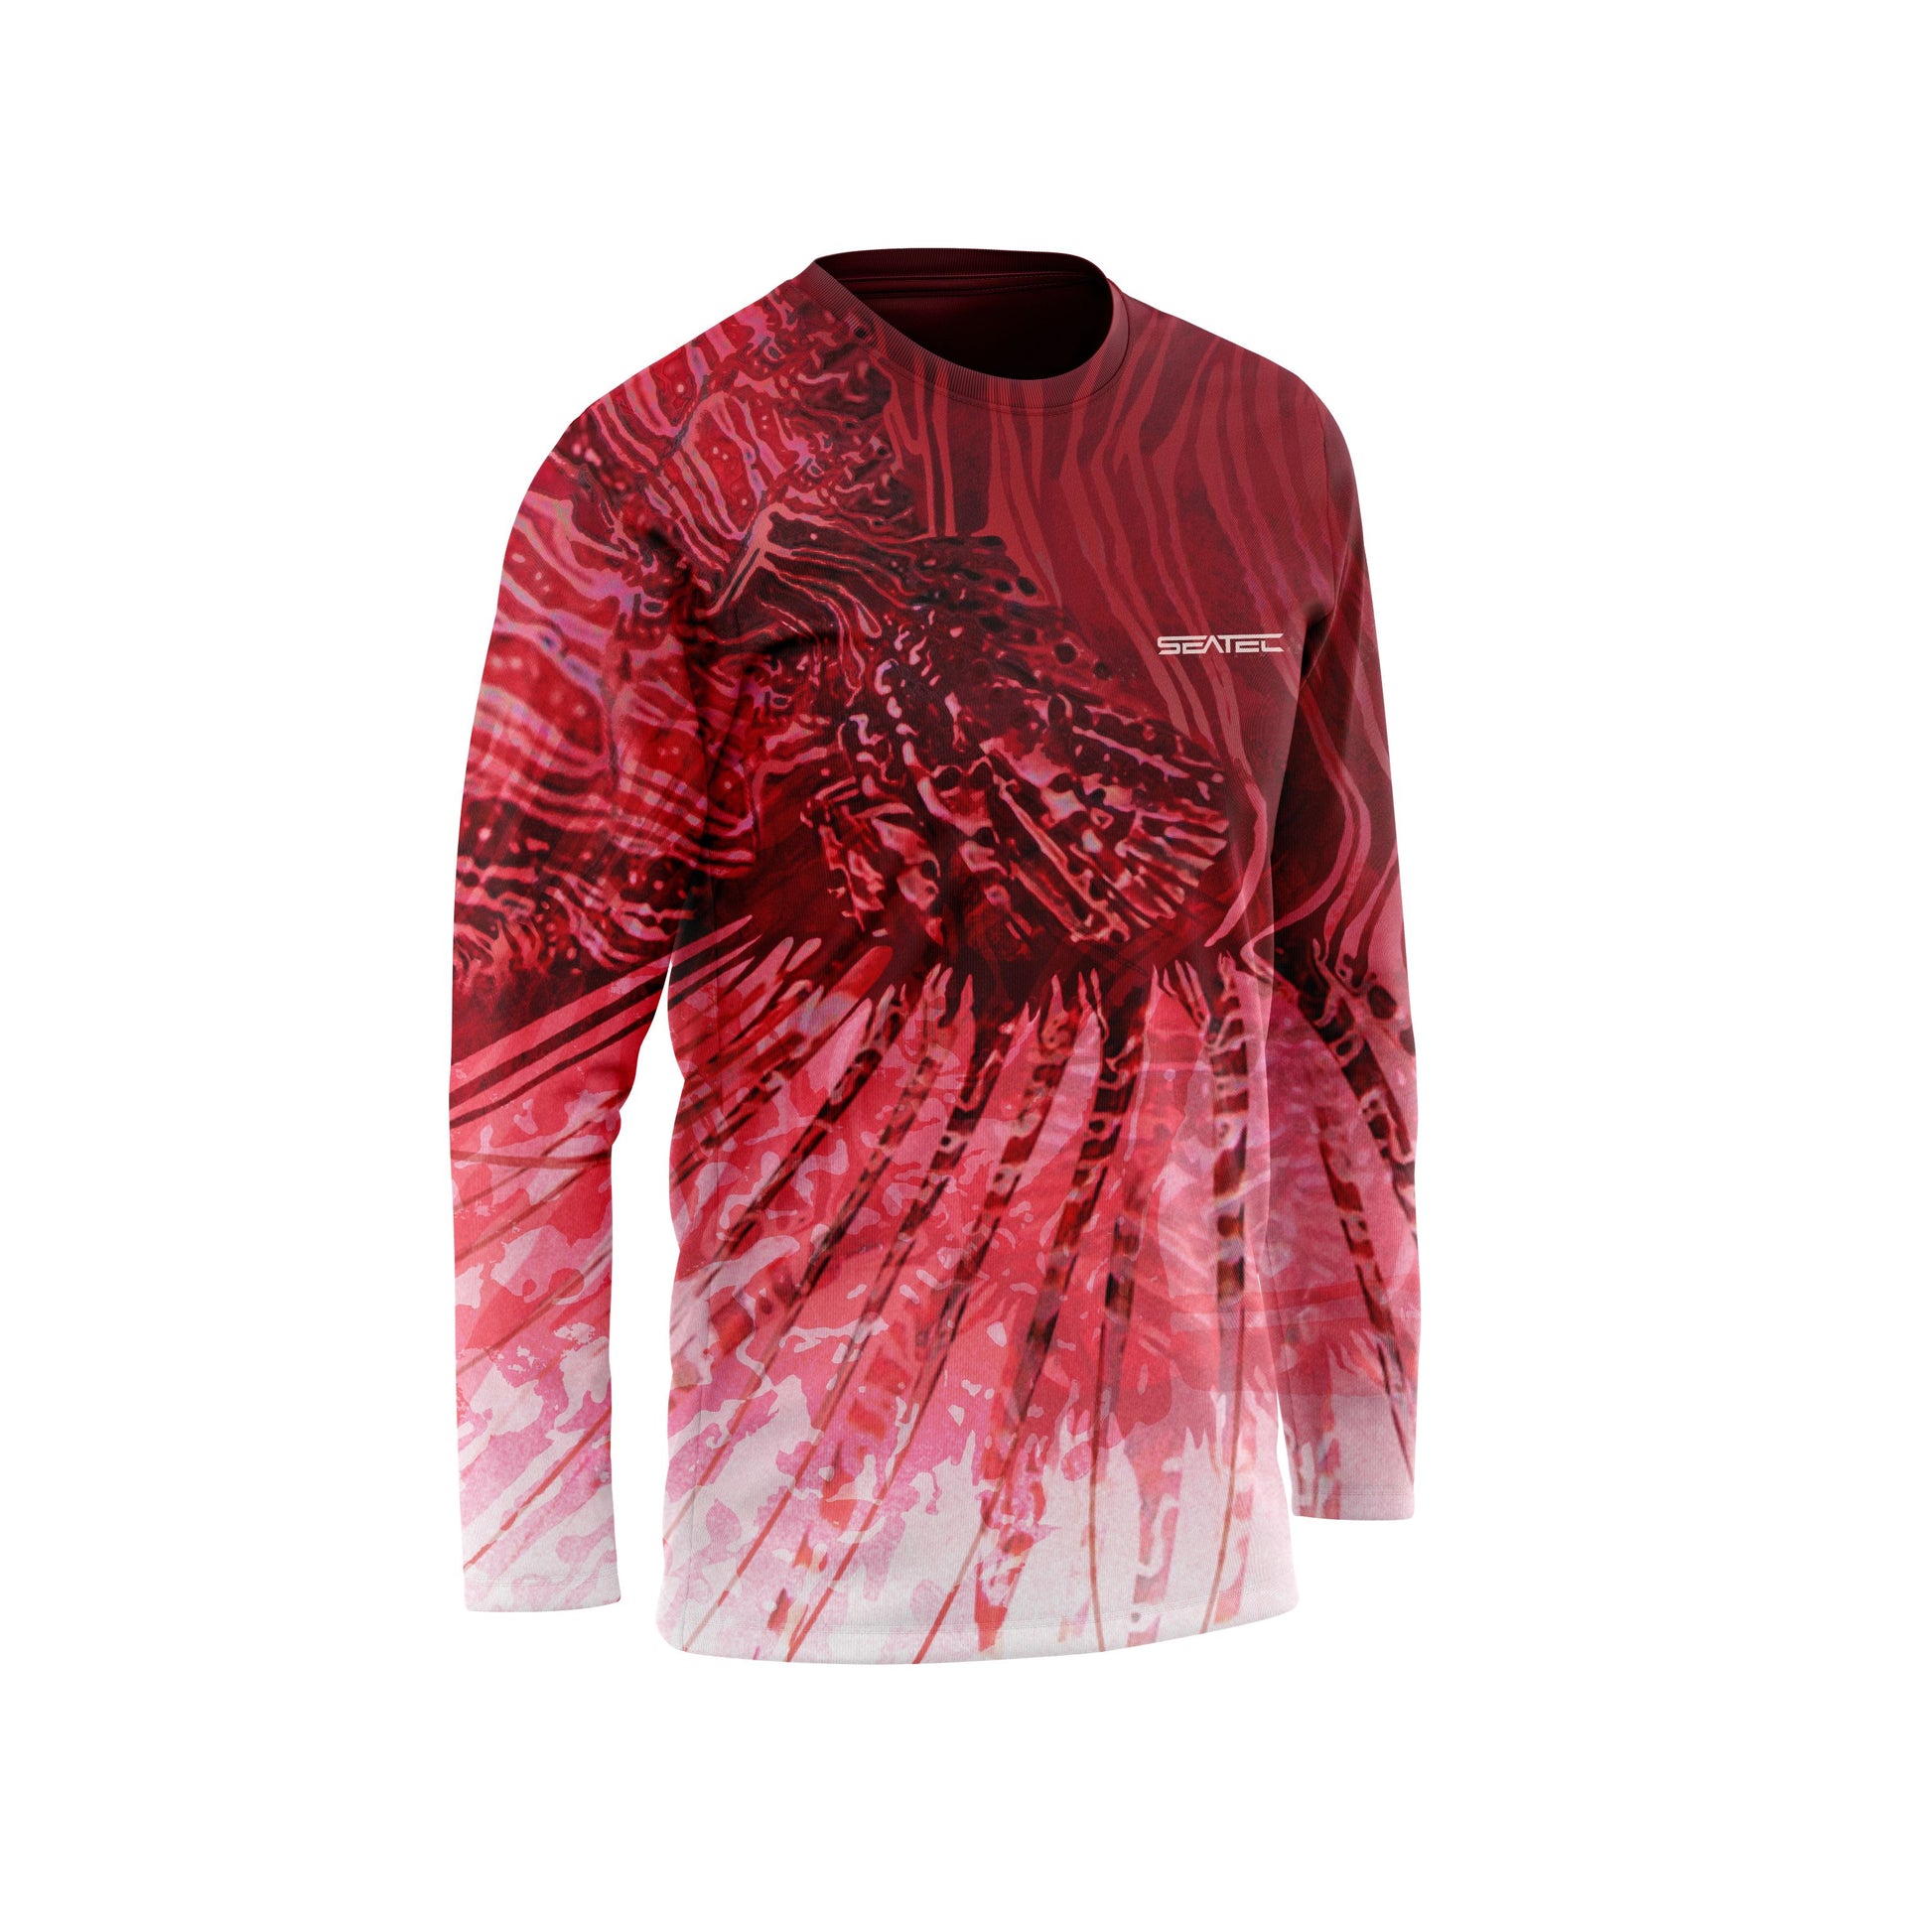 Lion Fish Sport Tec Performance Shirt, Long Sleeve – Seatec Outfitters